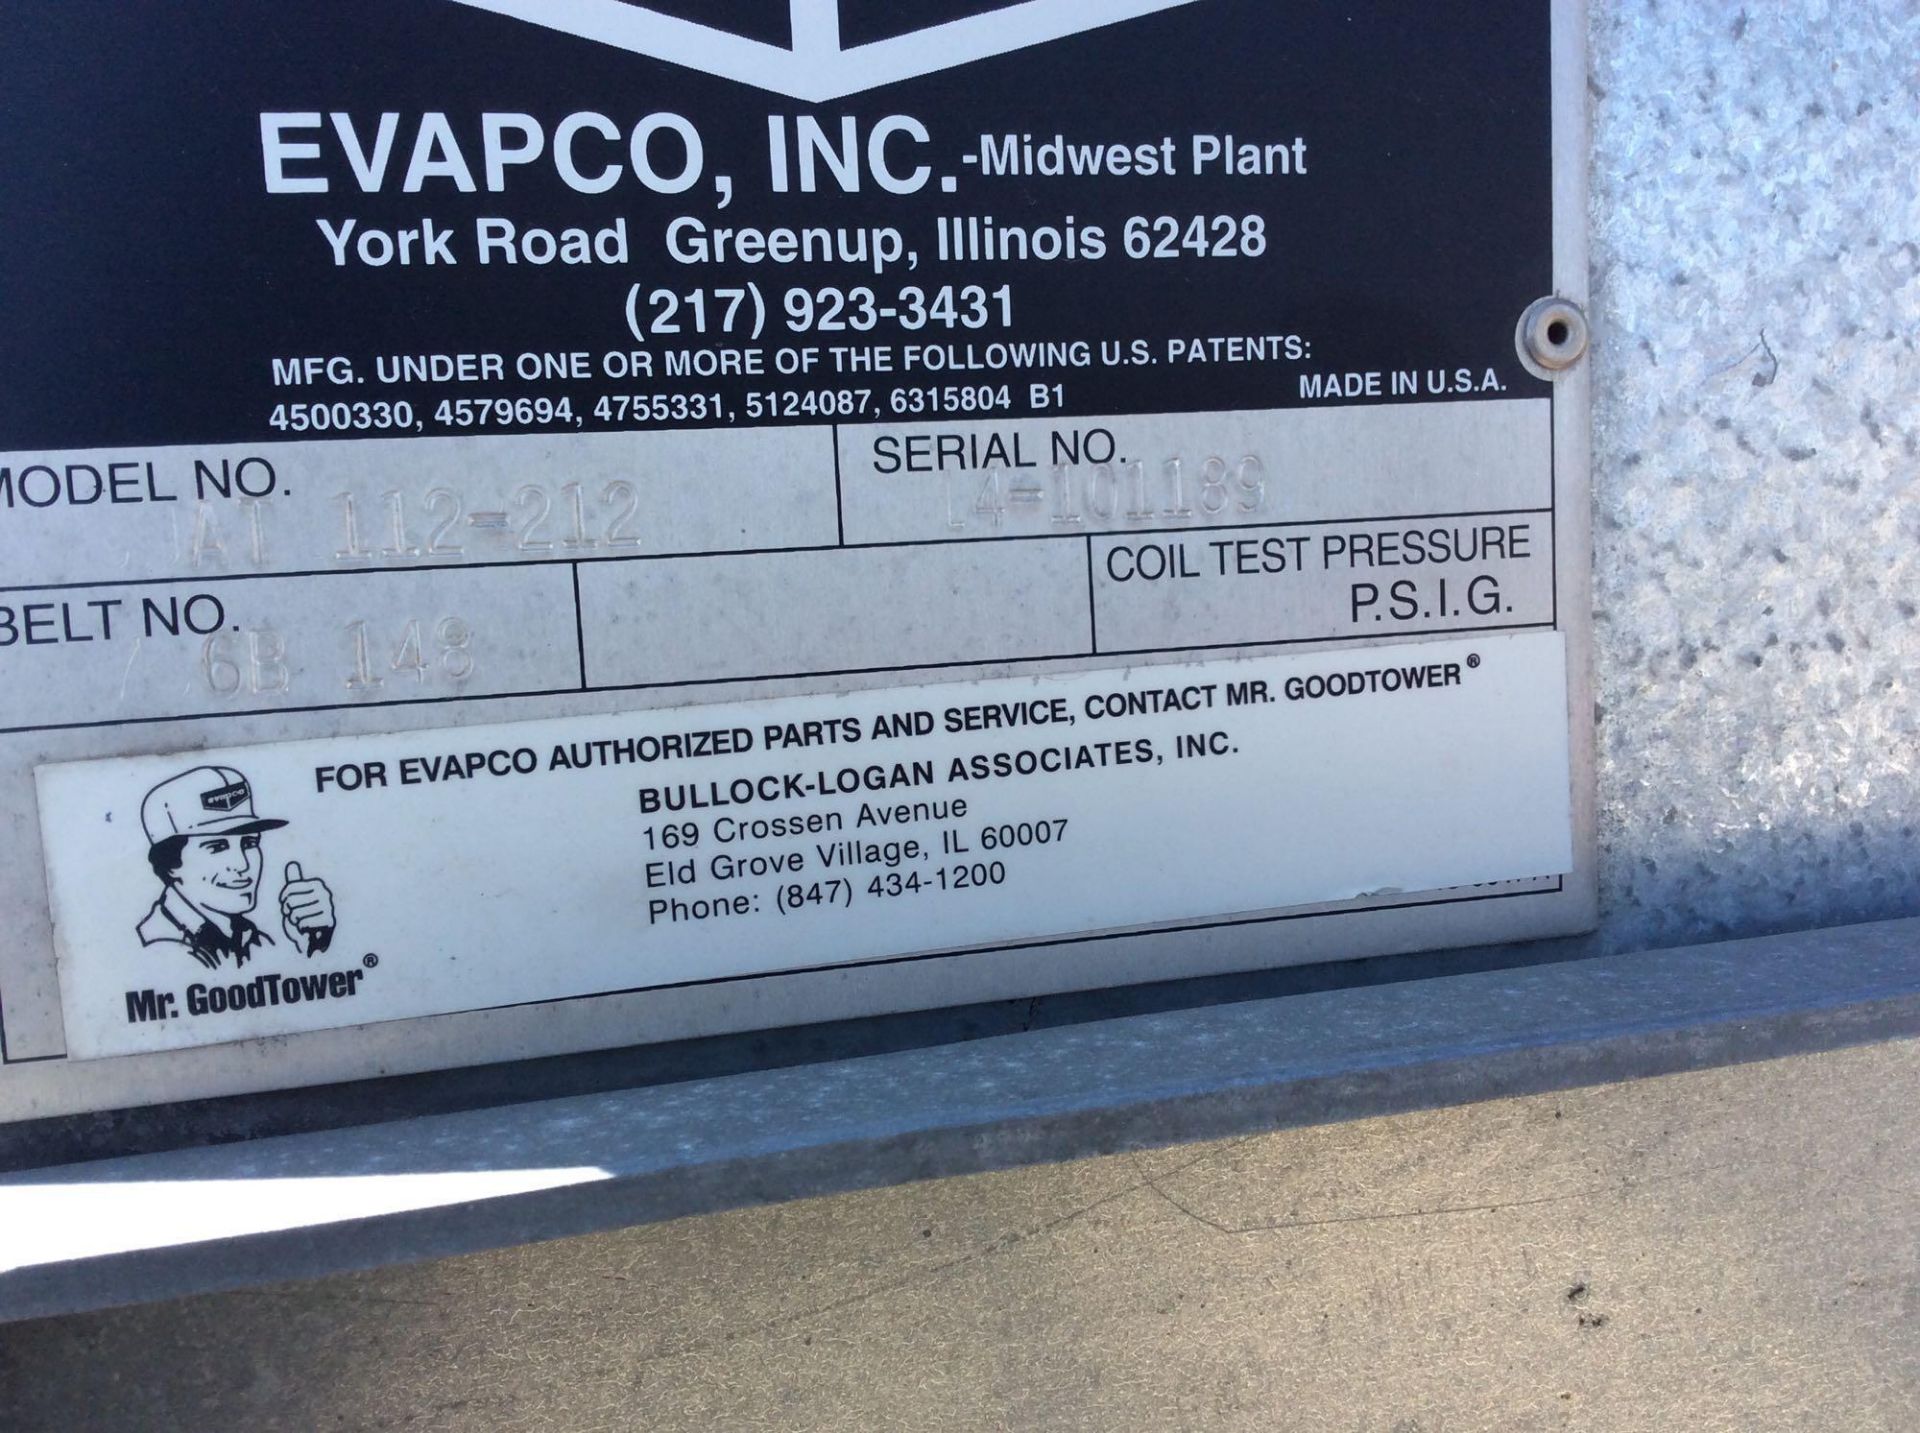 Evapco cooling tower, mn AT-112-212 (ON ROOF)